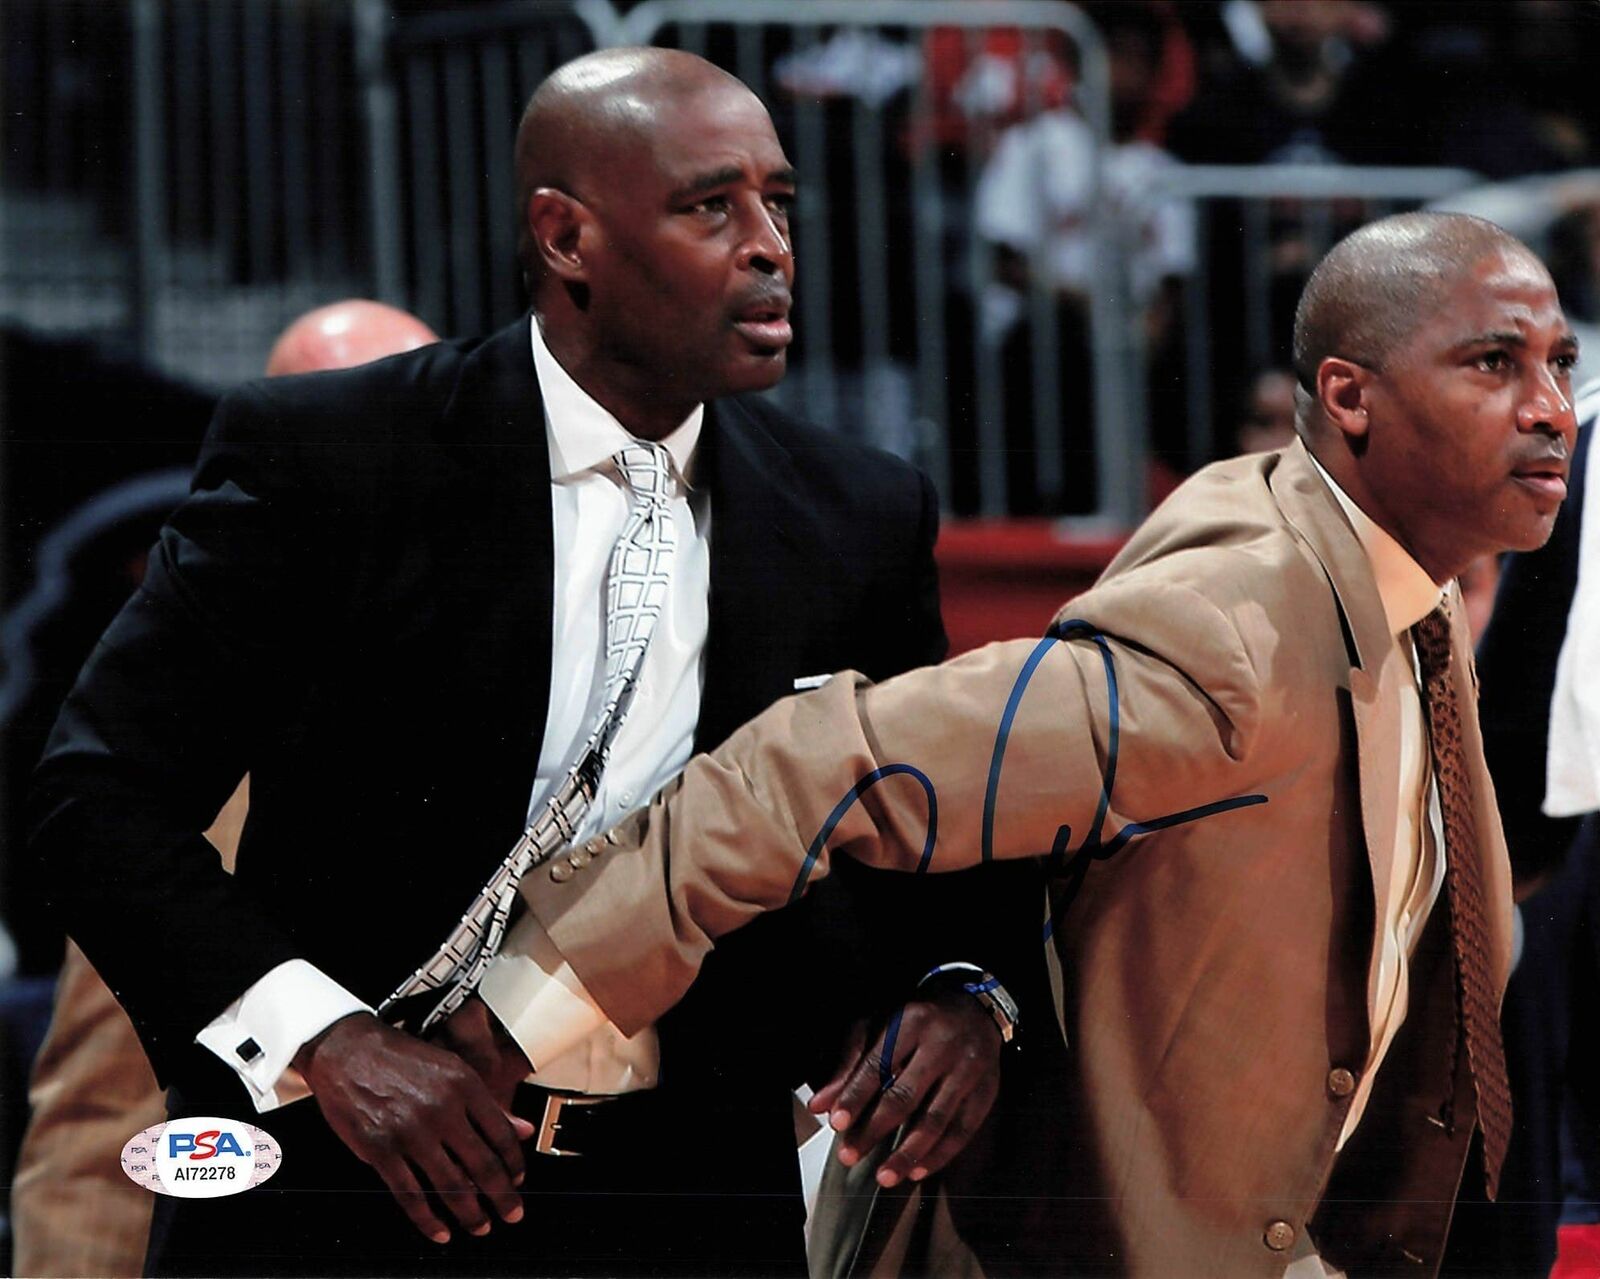 LARRY DREW Signed 8x10 Photo Poster painting PSA/DNA Los Angeles Clippers Autographed